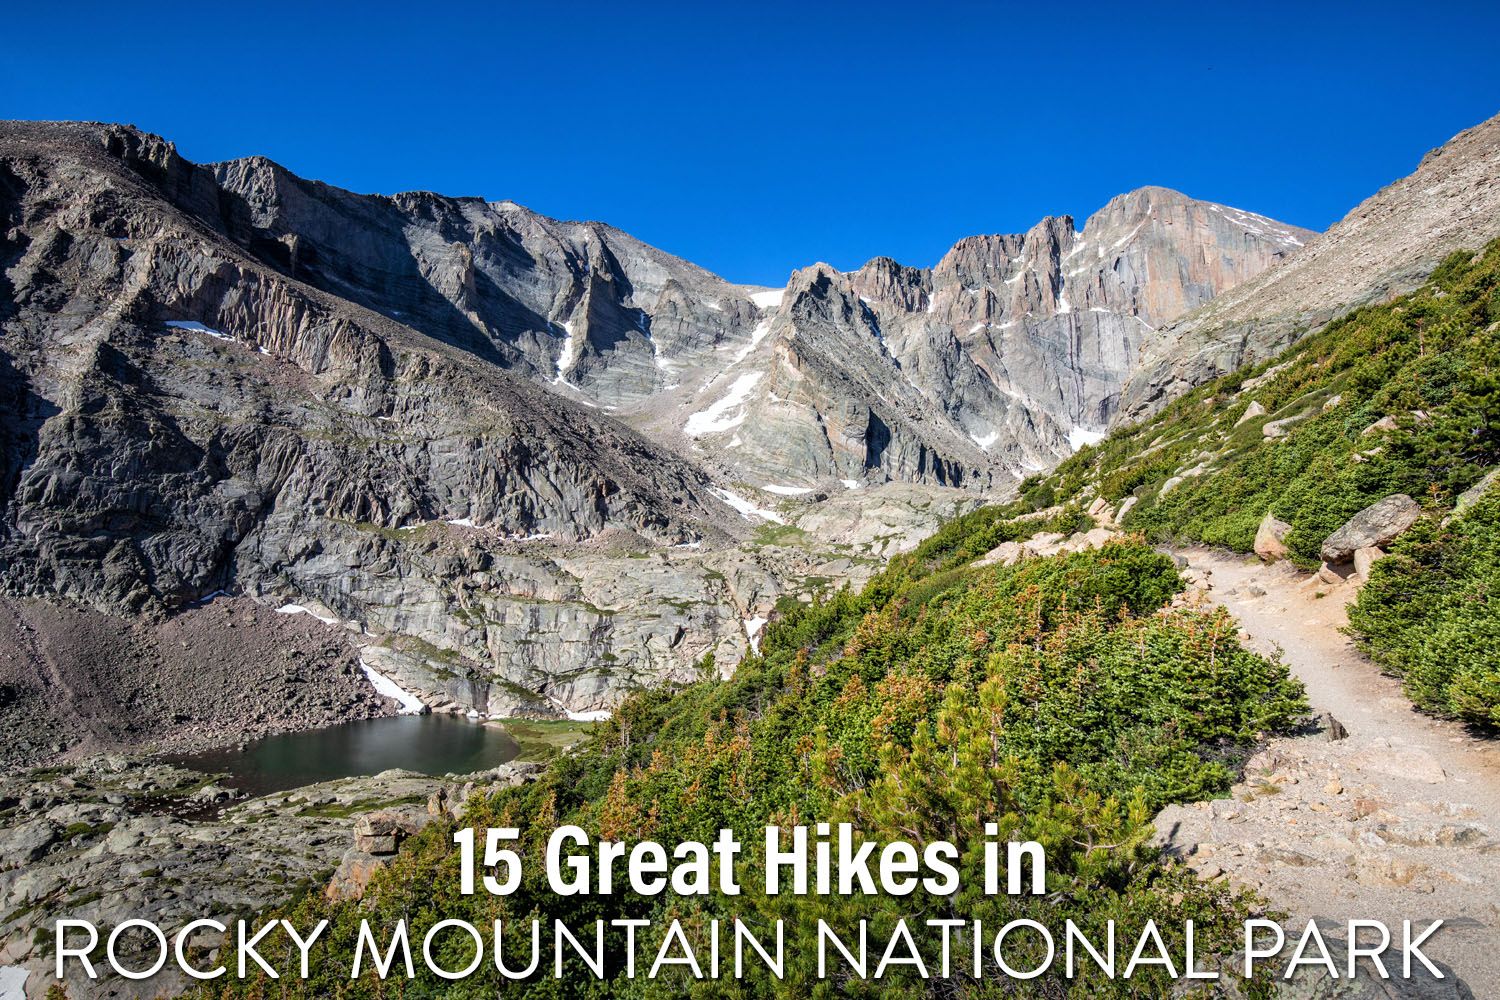 Hikes in Rocky Mountain National Park